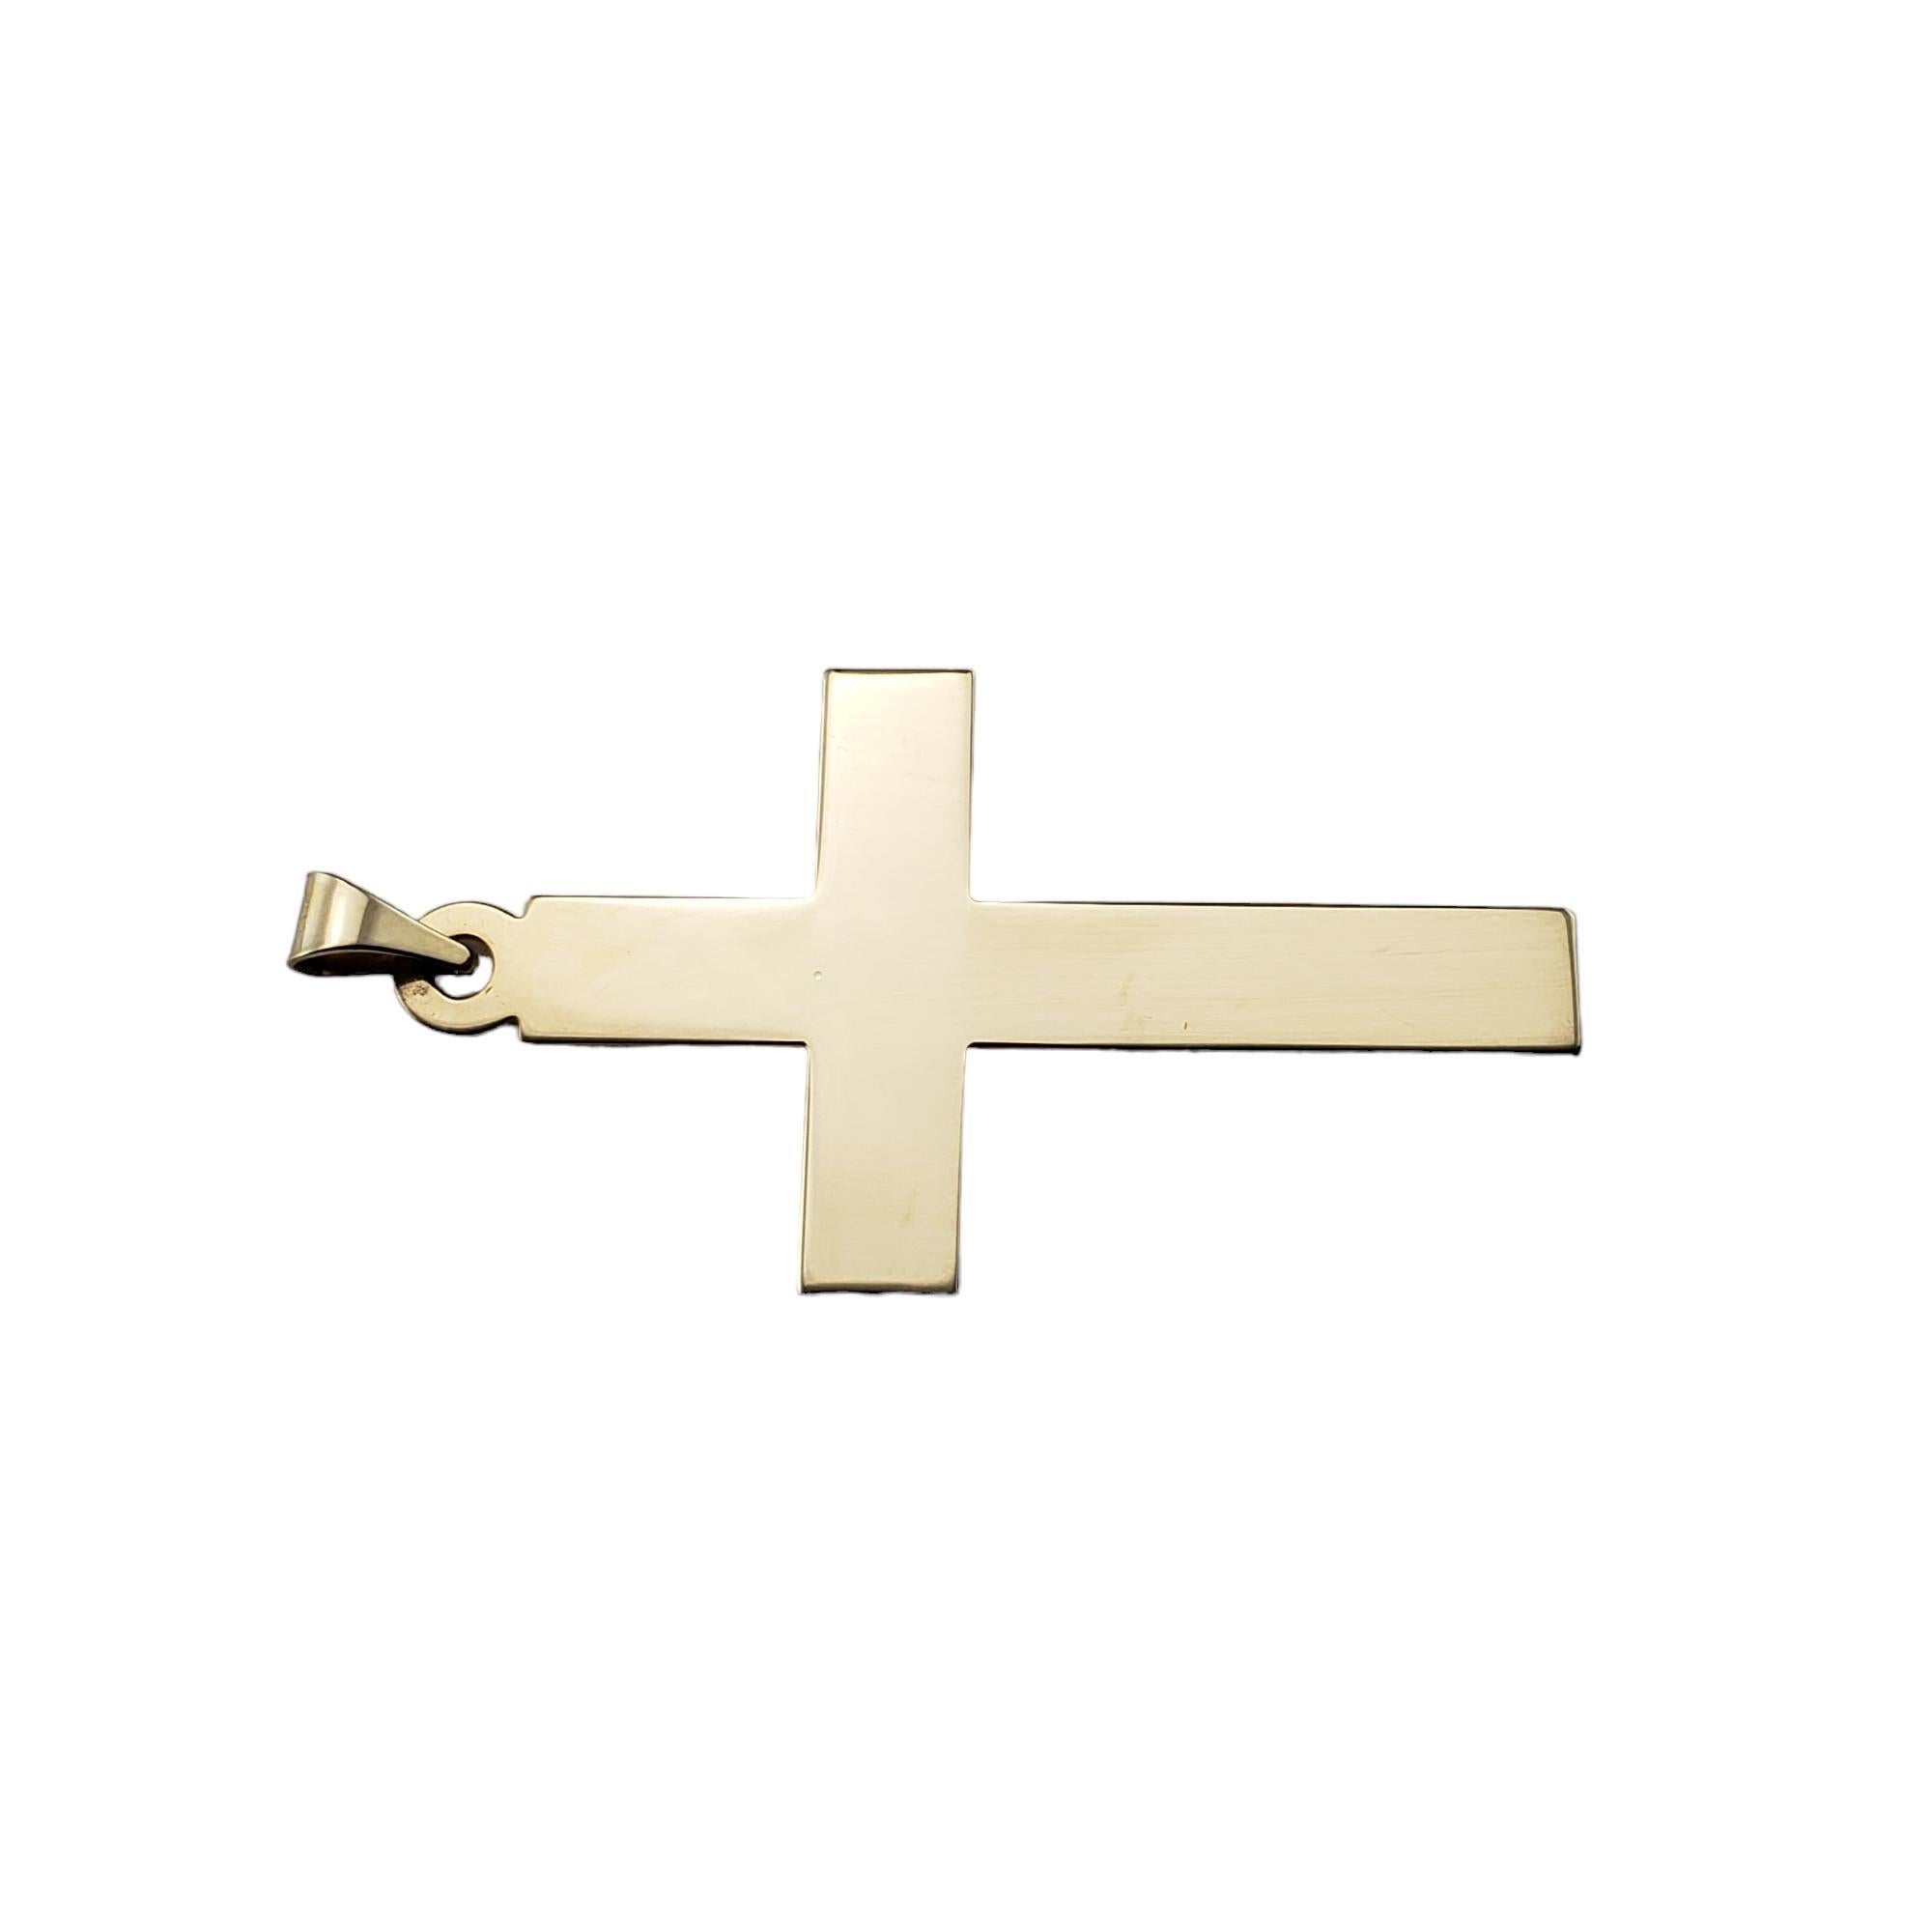 Vintage 14 Karat Yellow Gold Cross Pendant-

This elegant cross pendant is crafted in classic 14K yellow gold.

Size: 44.1 mm x 24.5 mm

Tested 14K gold.

Weight:  3.0 gr./ 1.9 dwt.

Very good condition, professionally polished.

Will come packaged